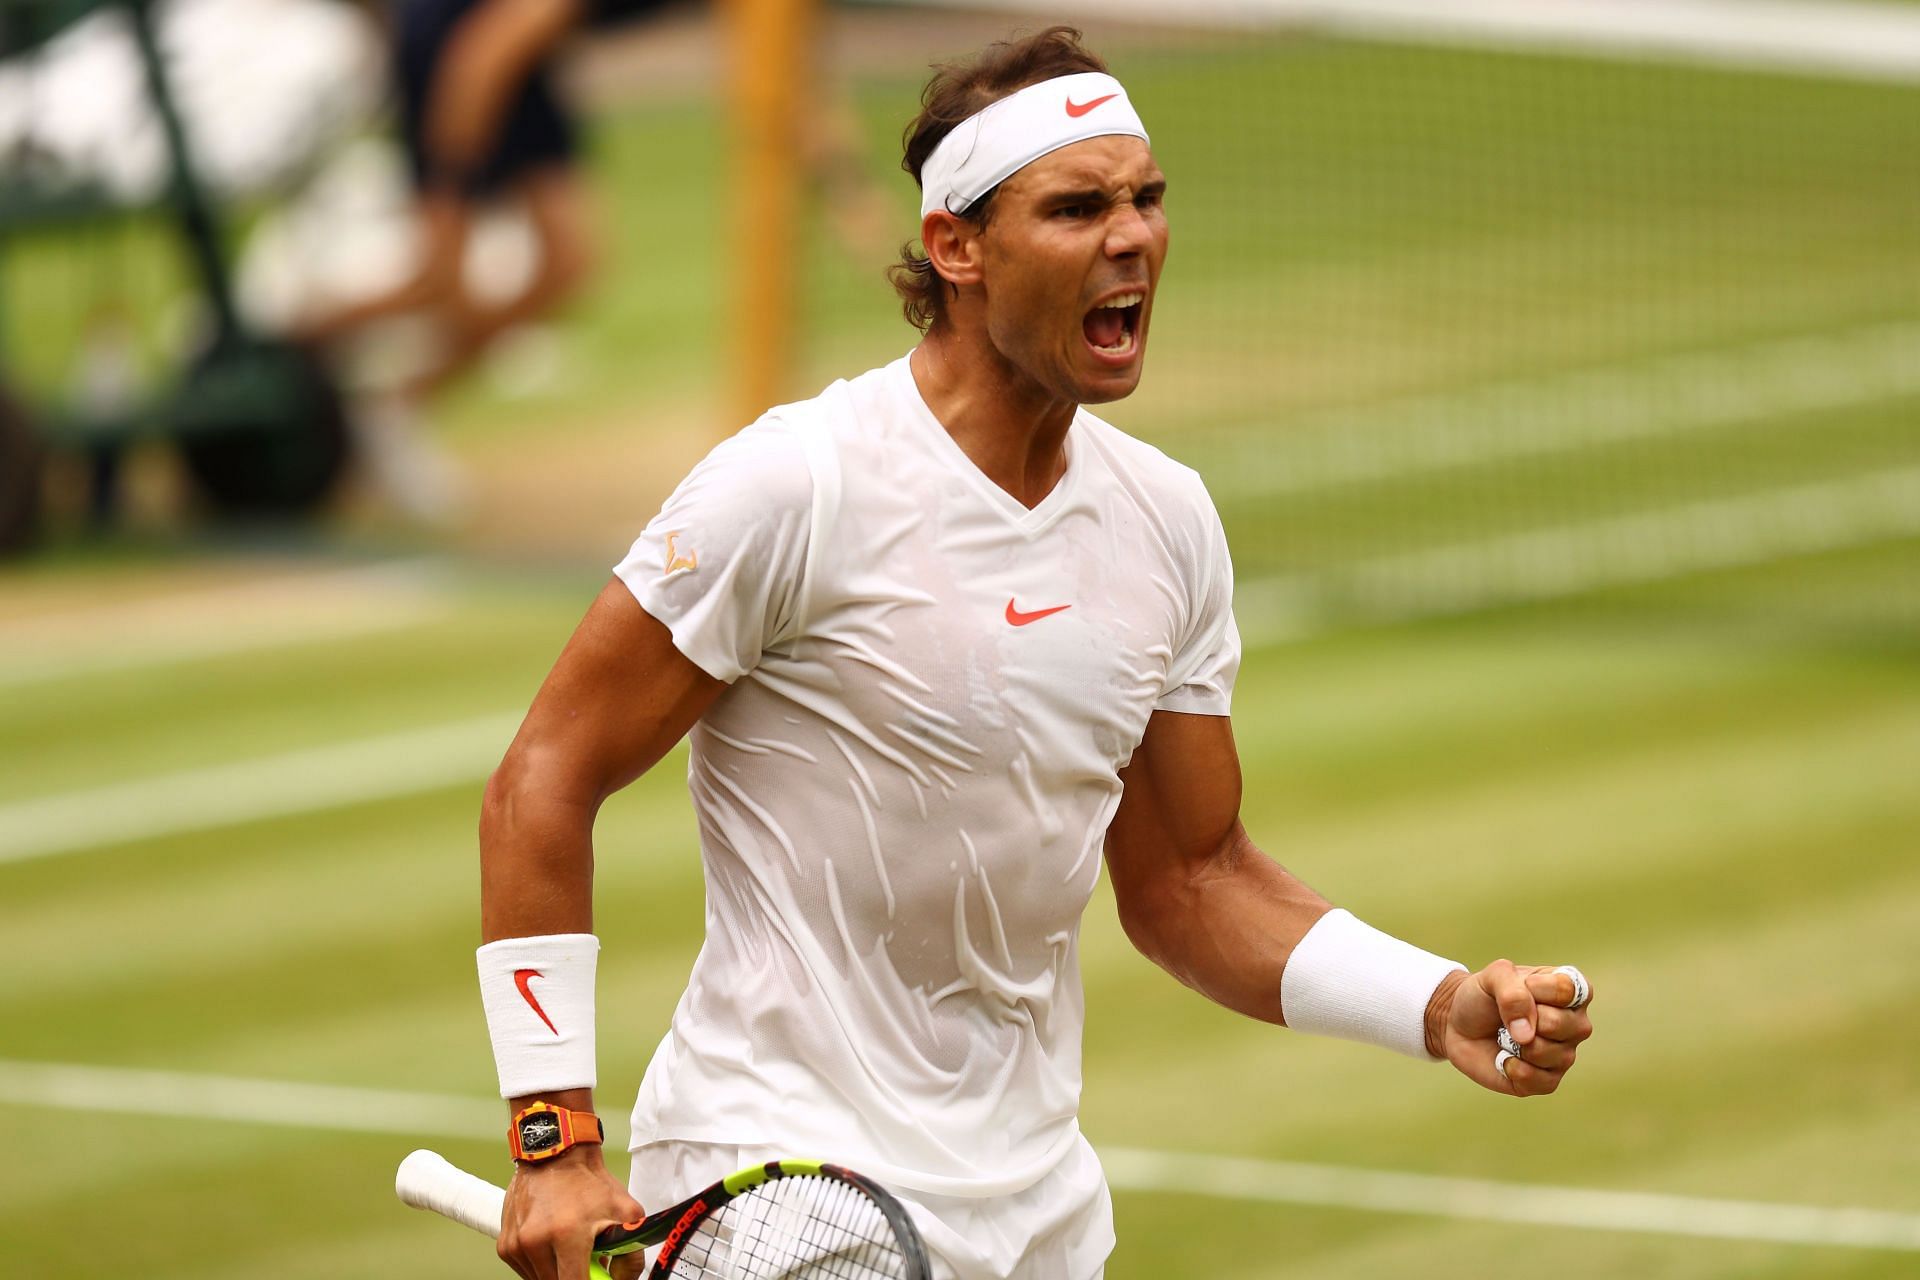 Rafael Nadal achieved the double win in 2008.